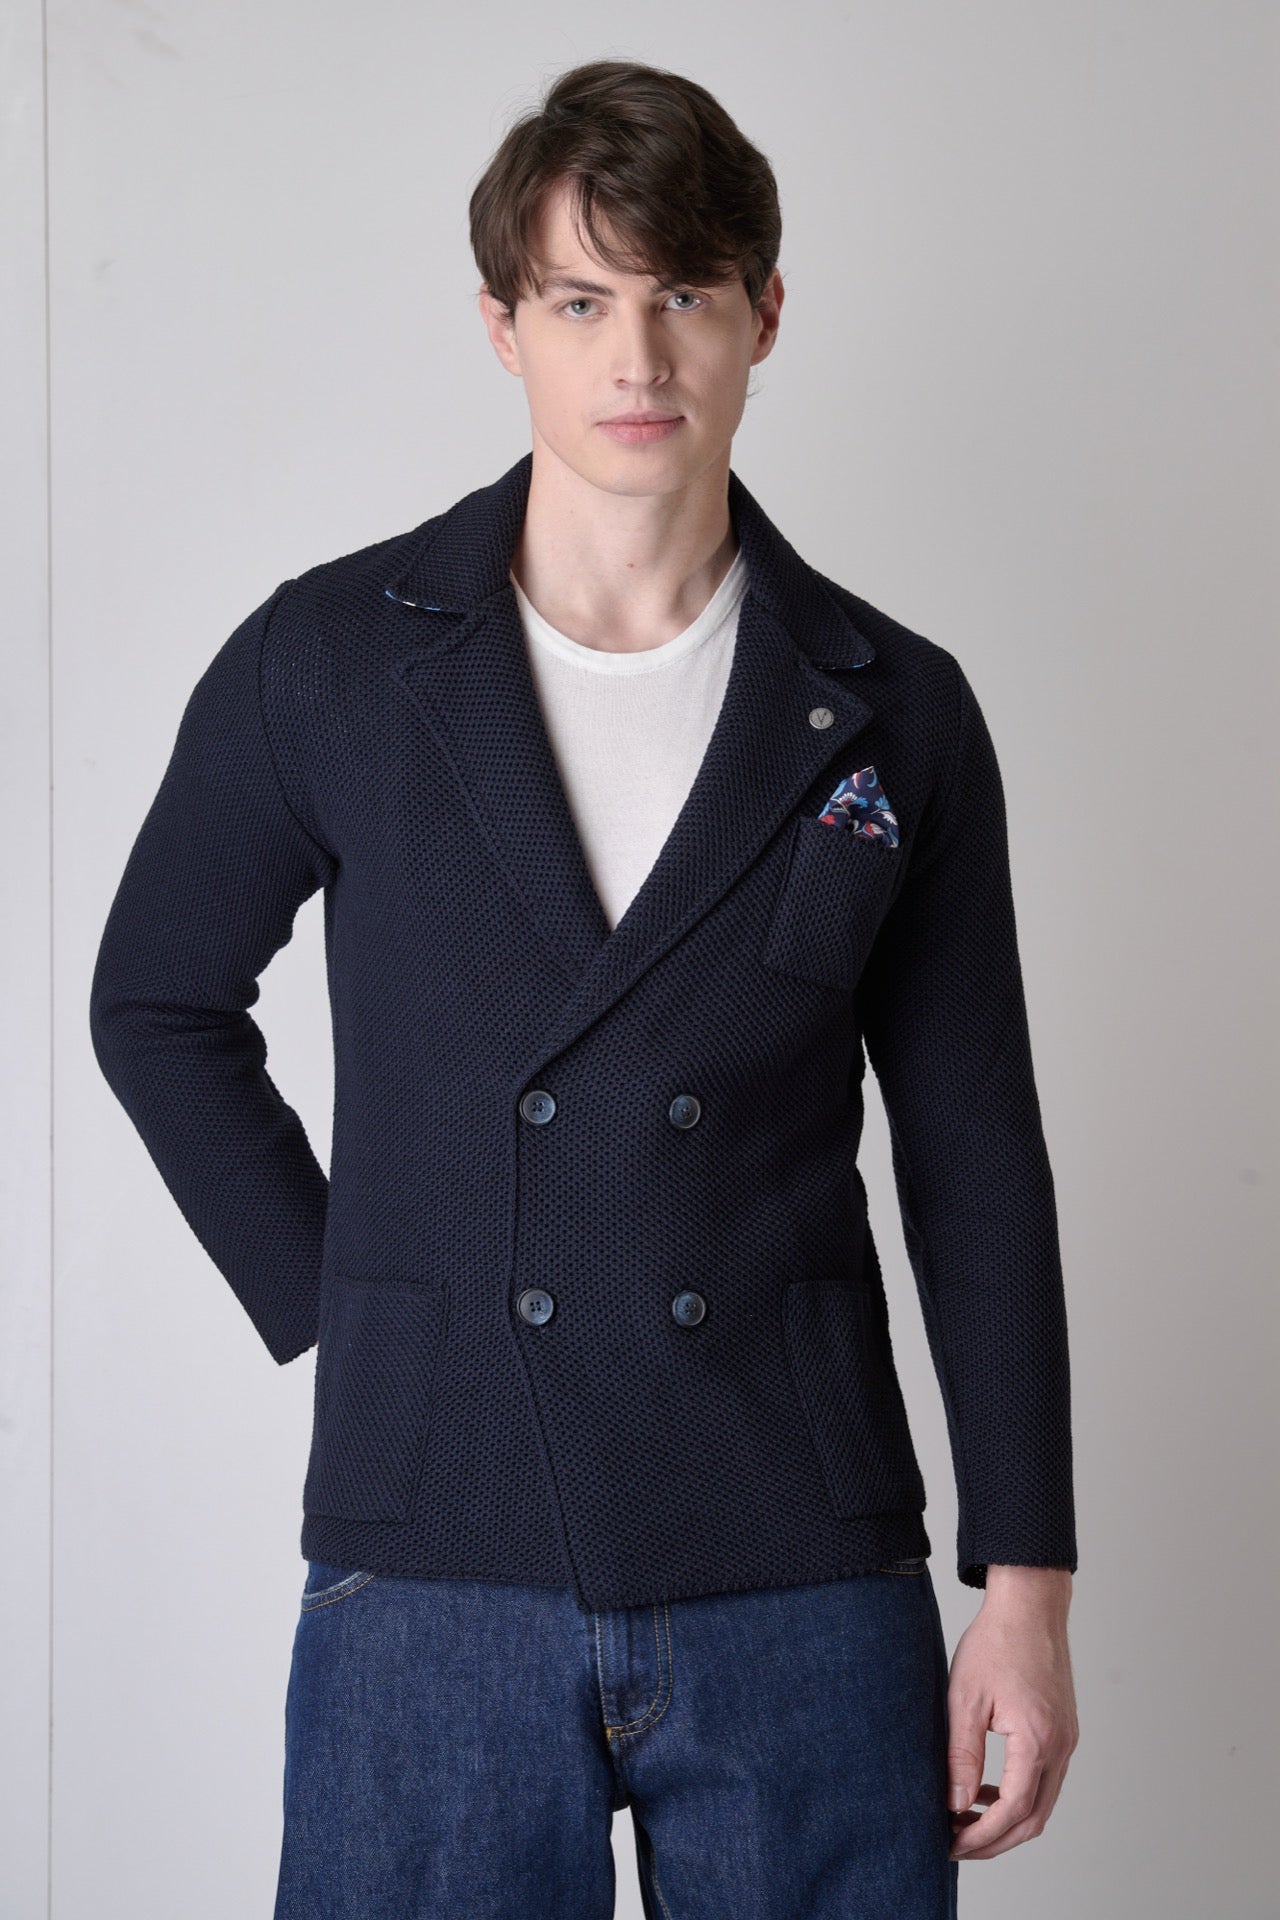 Blue Bird's Eye Double-breasted Jacket with inner collar and pocket square in V2 fabric